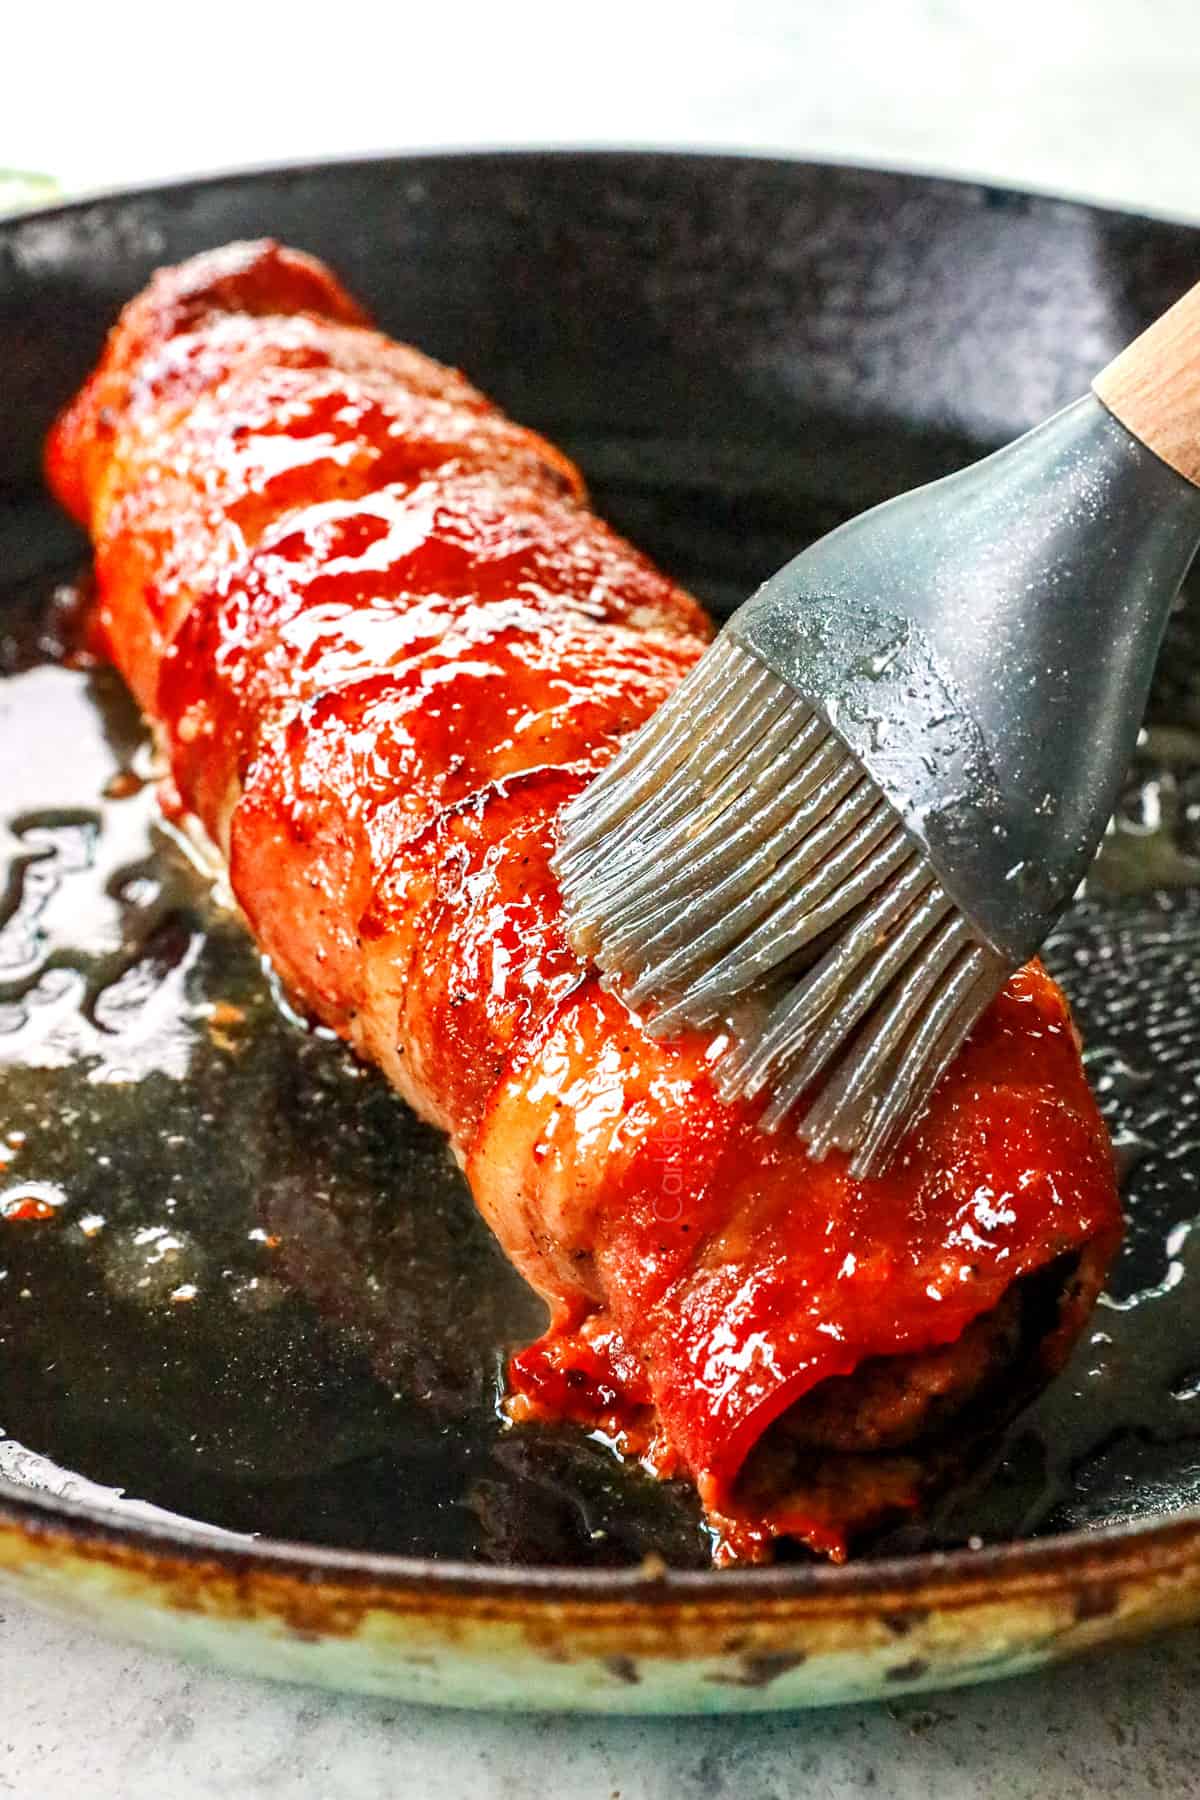 showing how to make bacon wrapped pork tenderloin by brushing the pork with glaze after baking